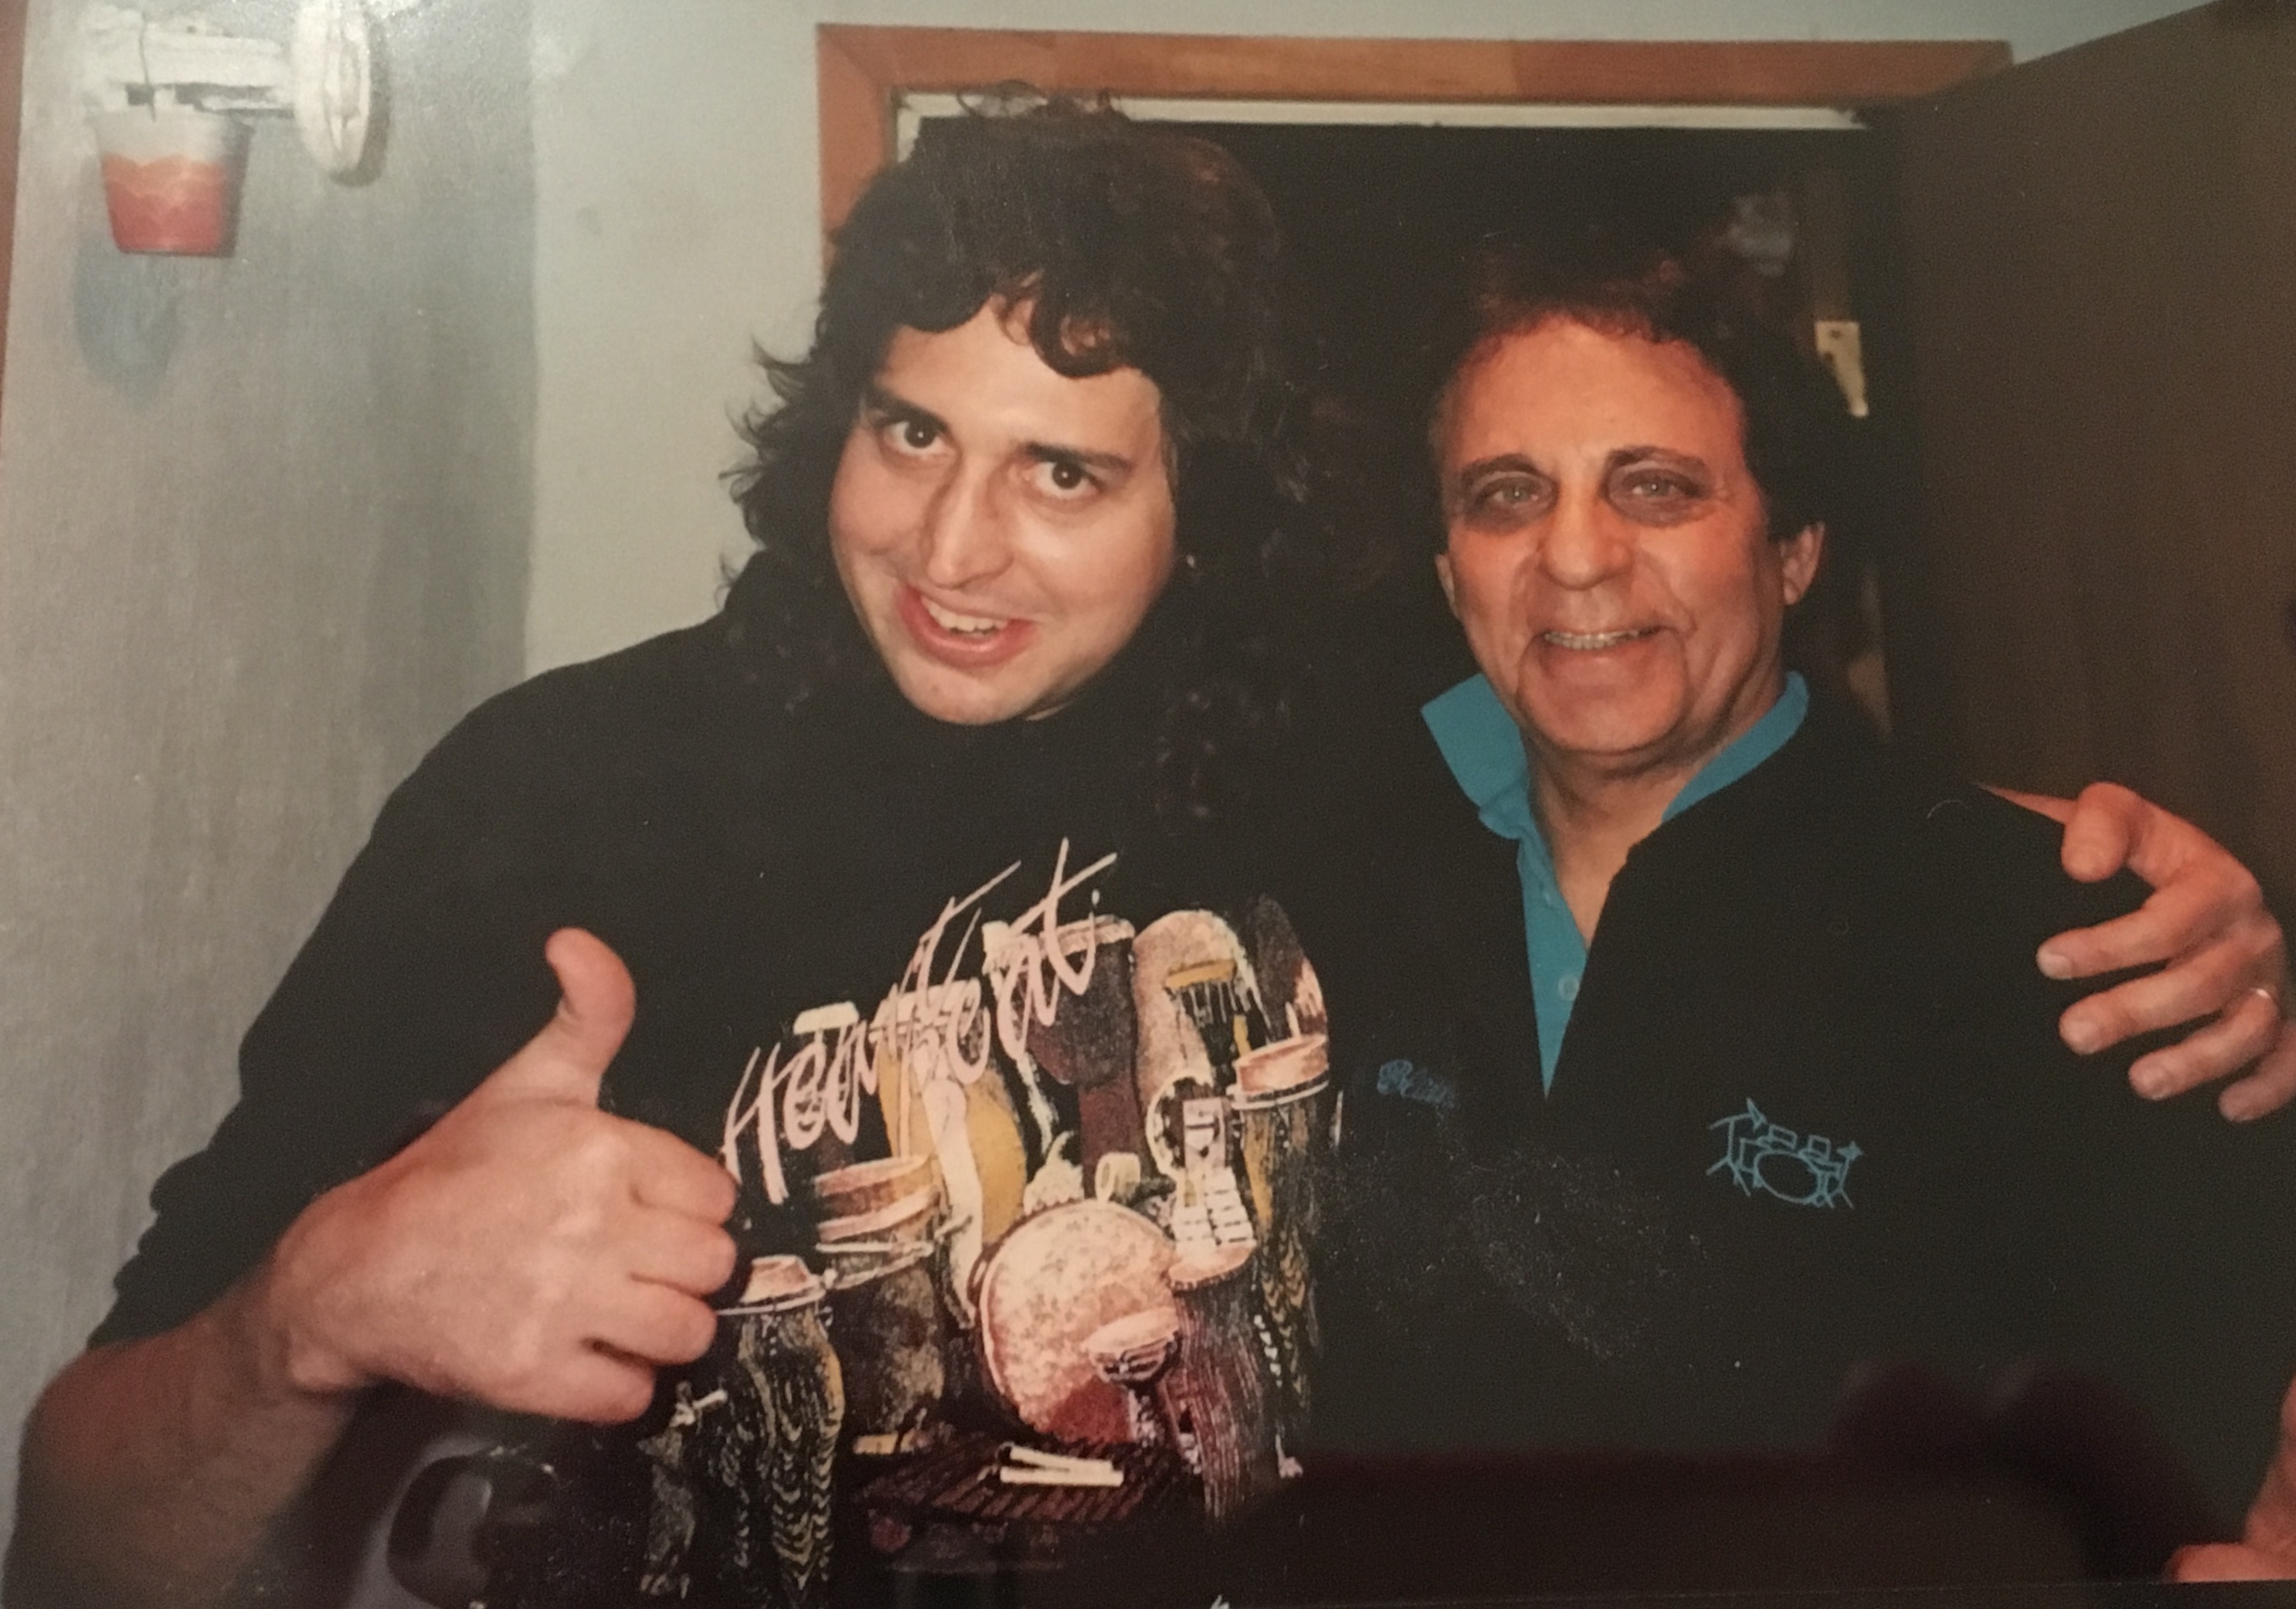 Legendary drummer Hal Blaine passed away at age 90 on March 11th